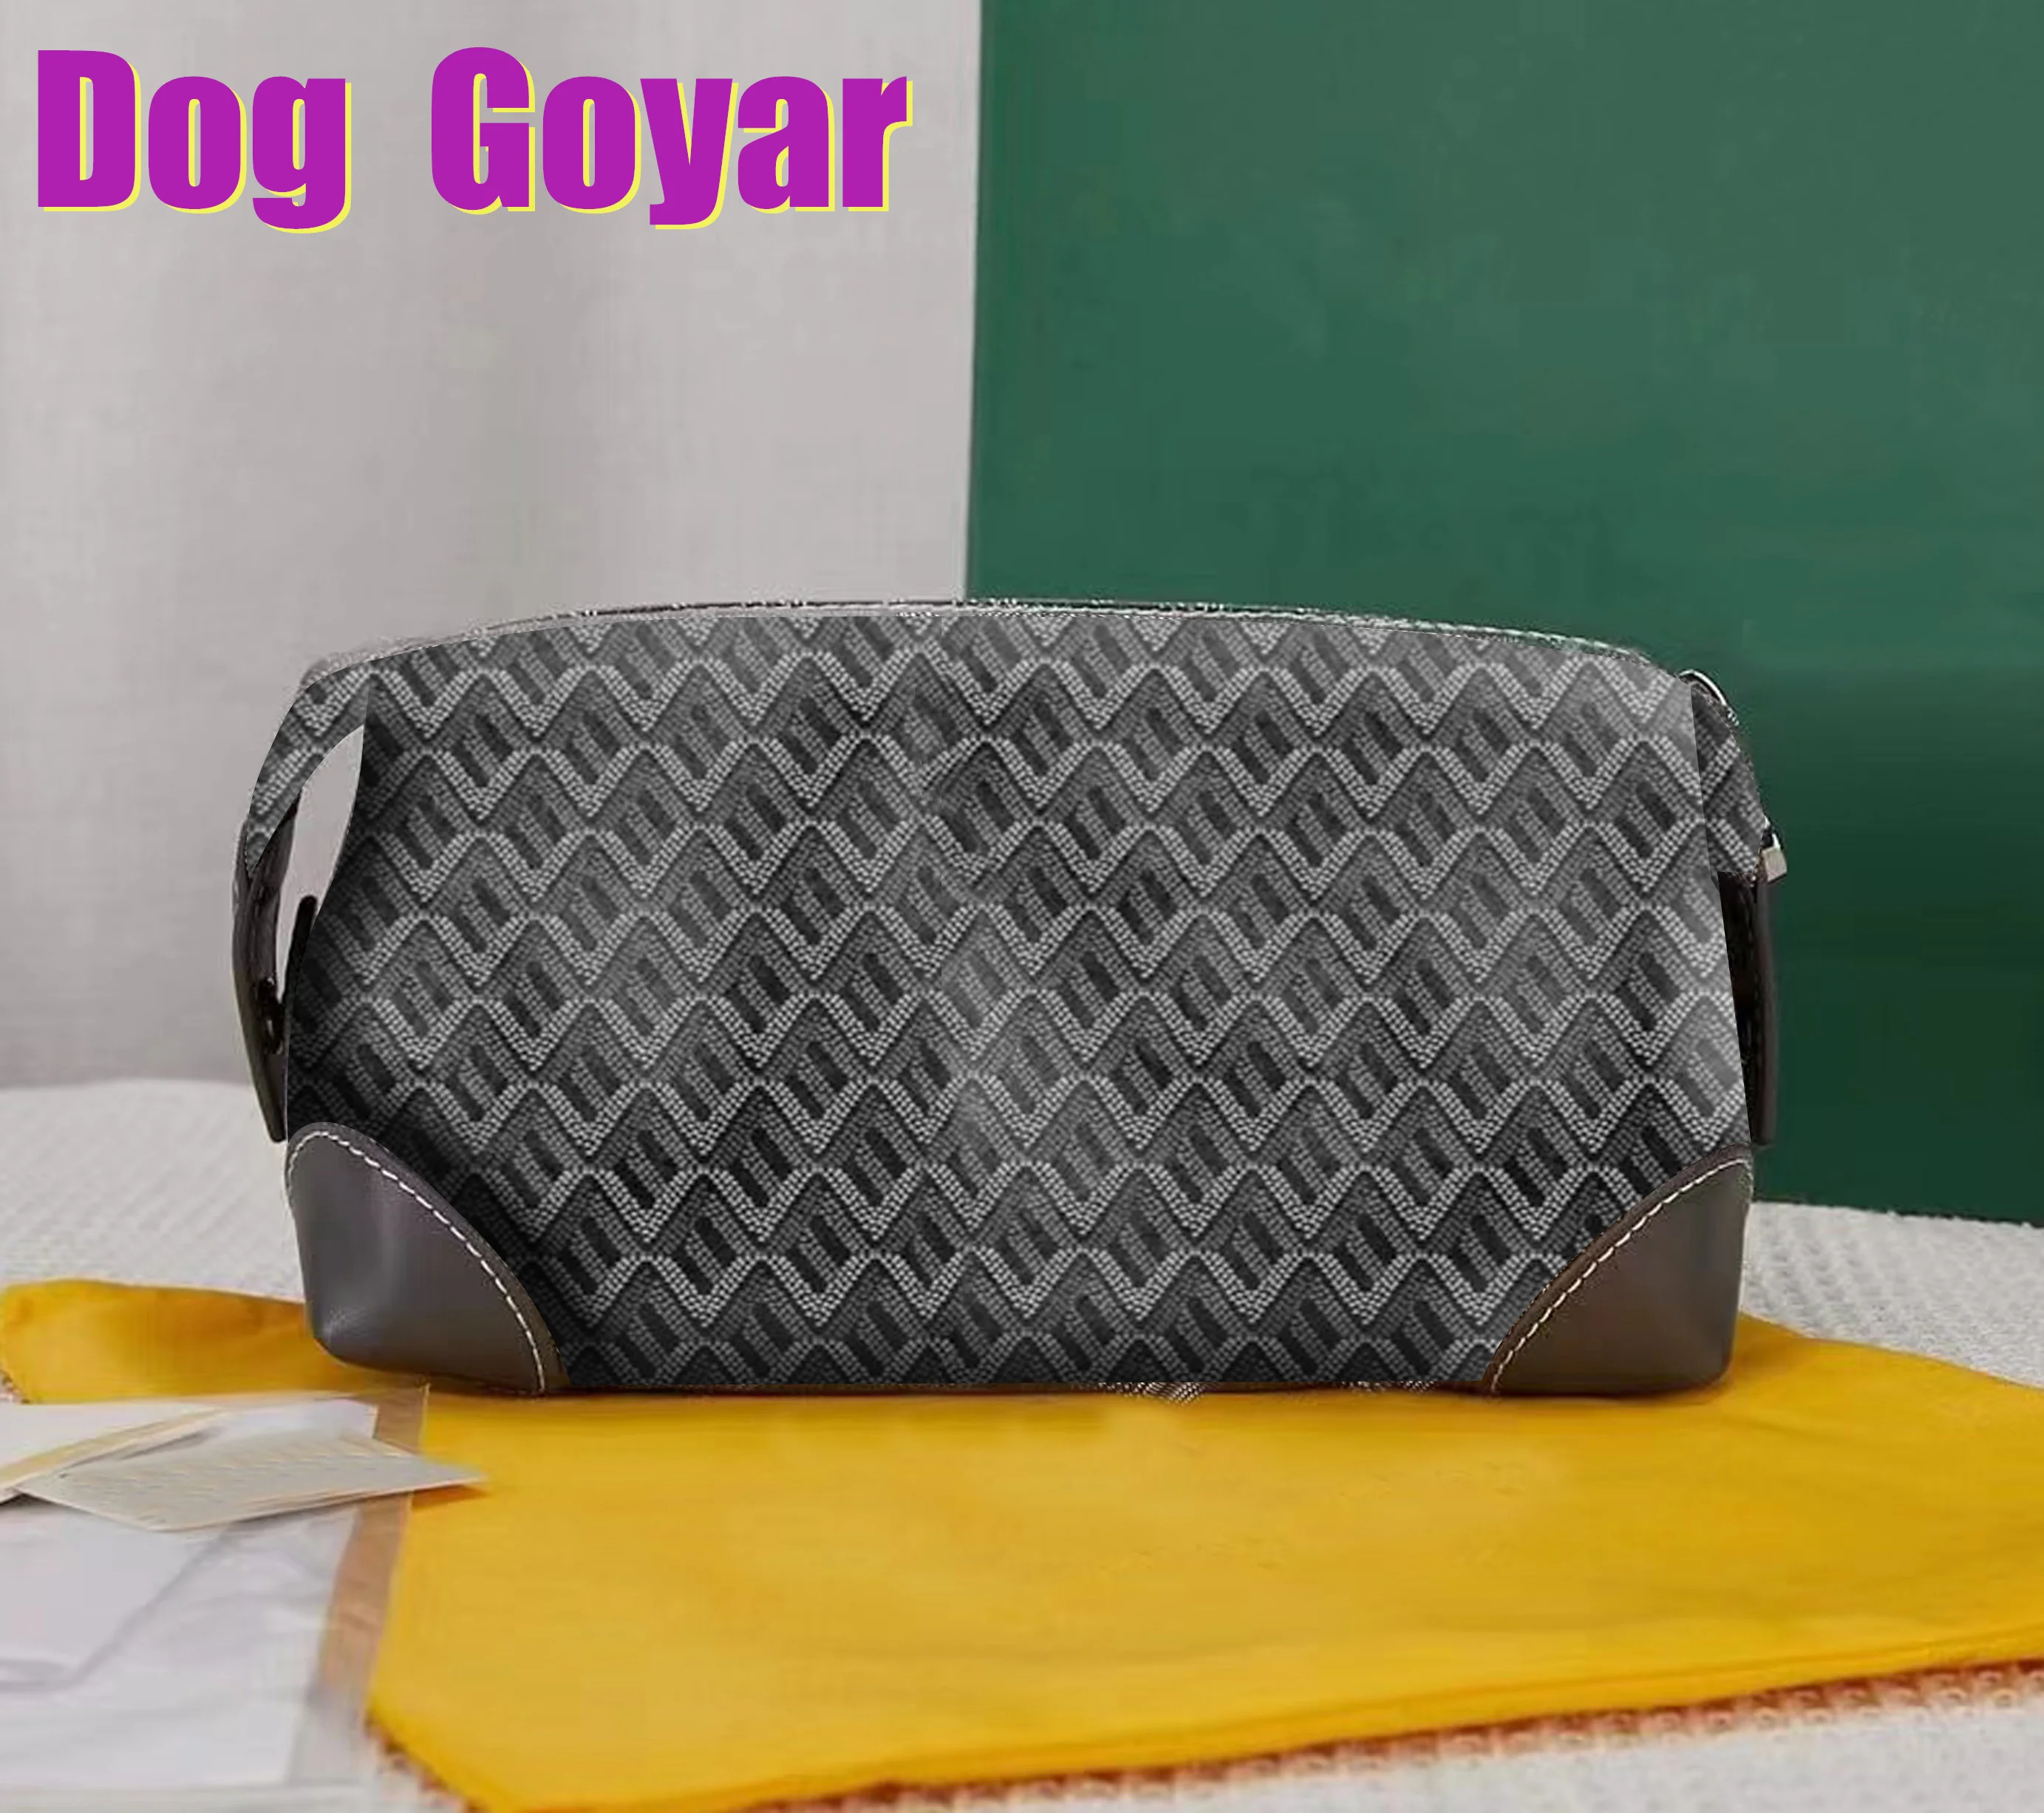 

Dog Goyar Clutch Bags Women men A+++++ hig quality Envelope package documents Toiletry Pouch Protection Makeup Clutch Leather